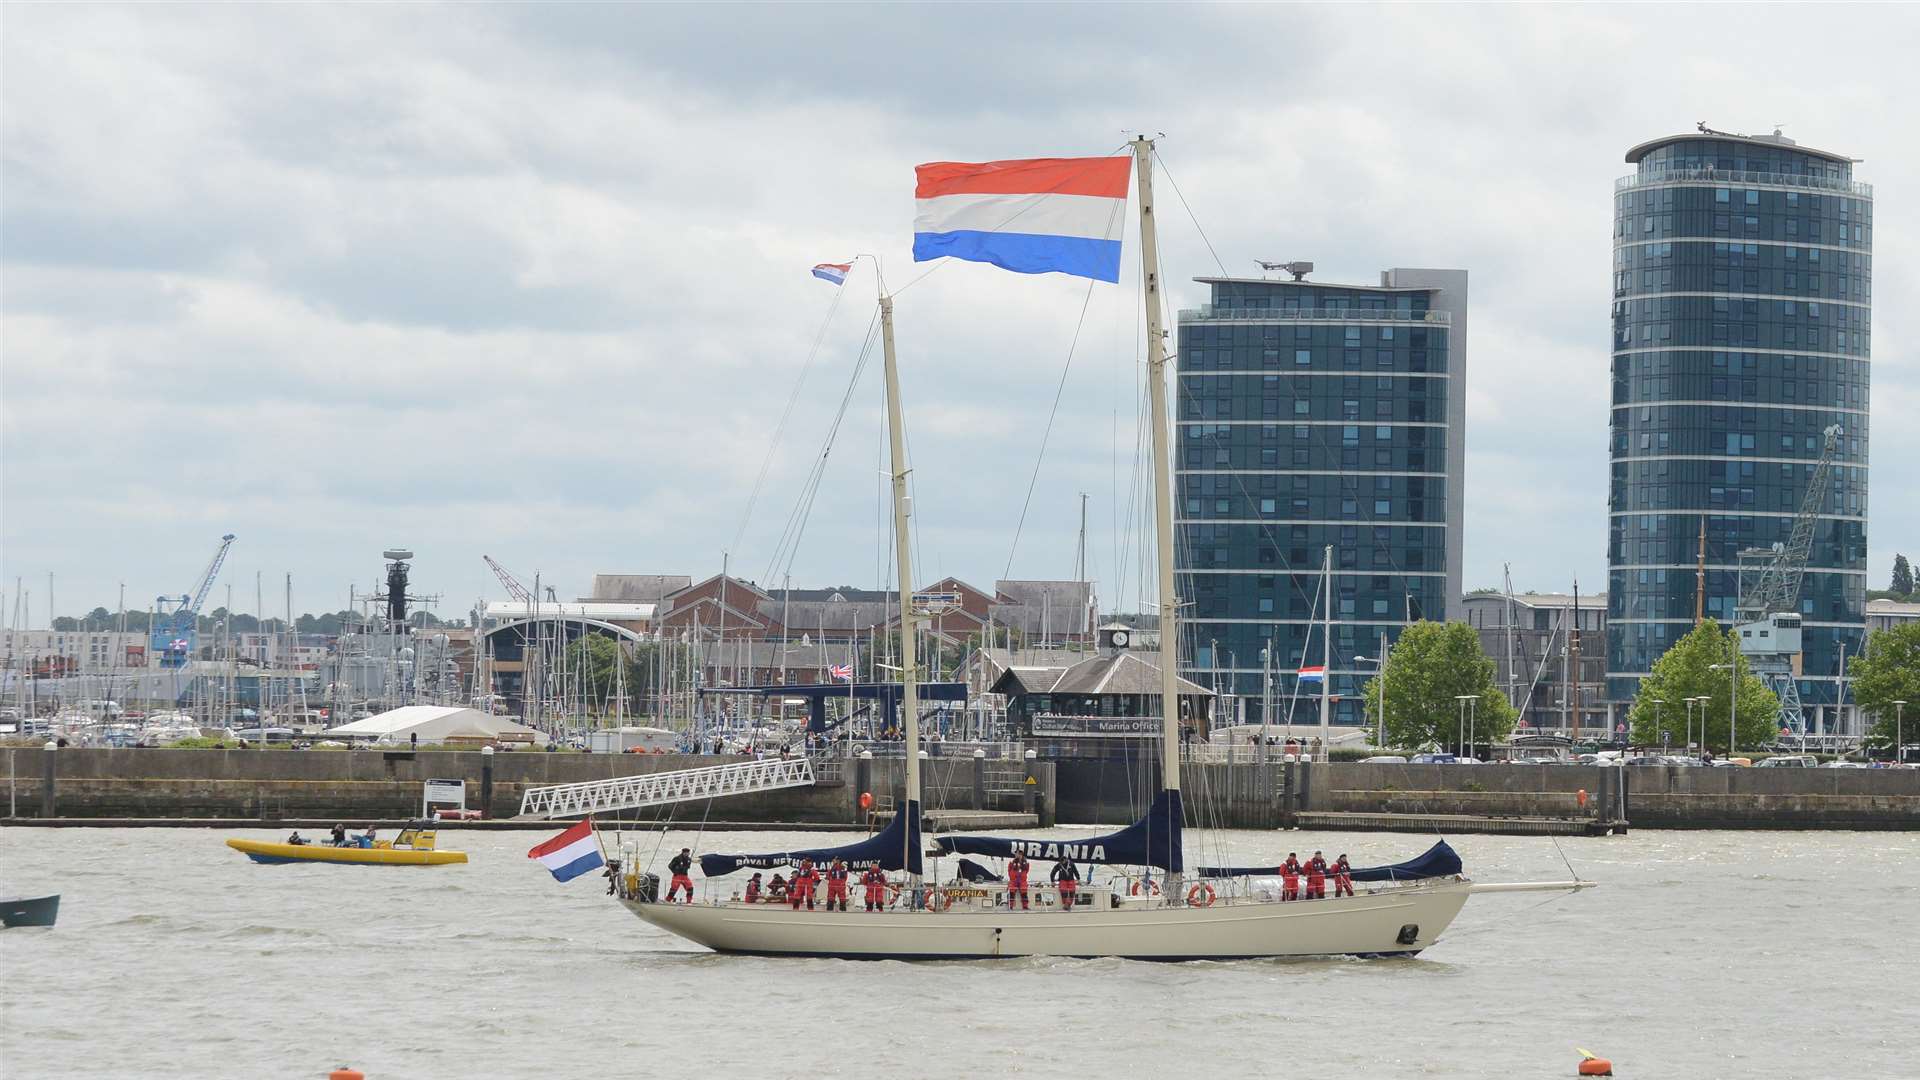 Fleet of 100 Dutch yachts arriving in Medway.